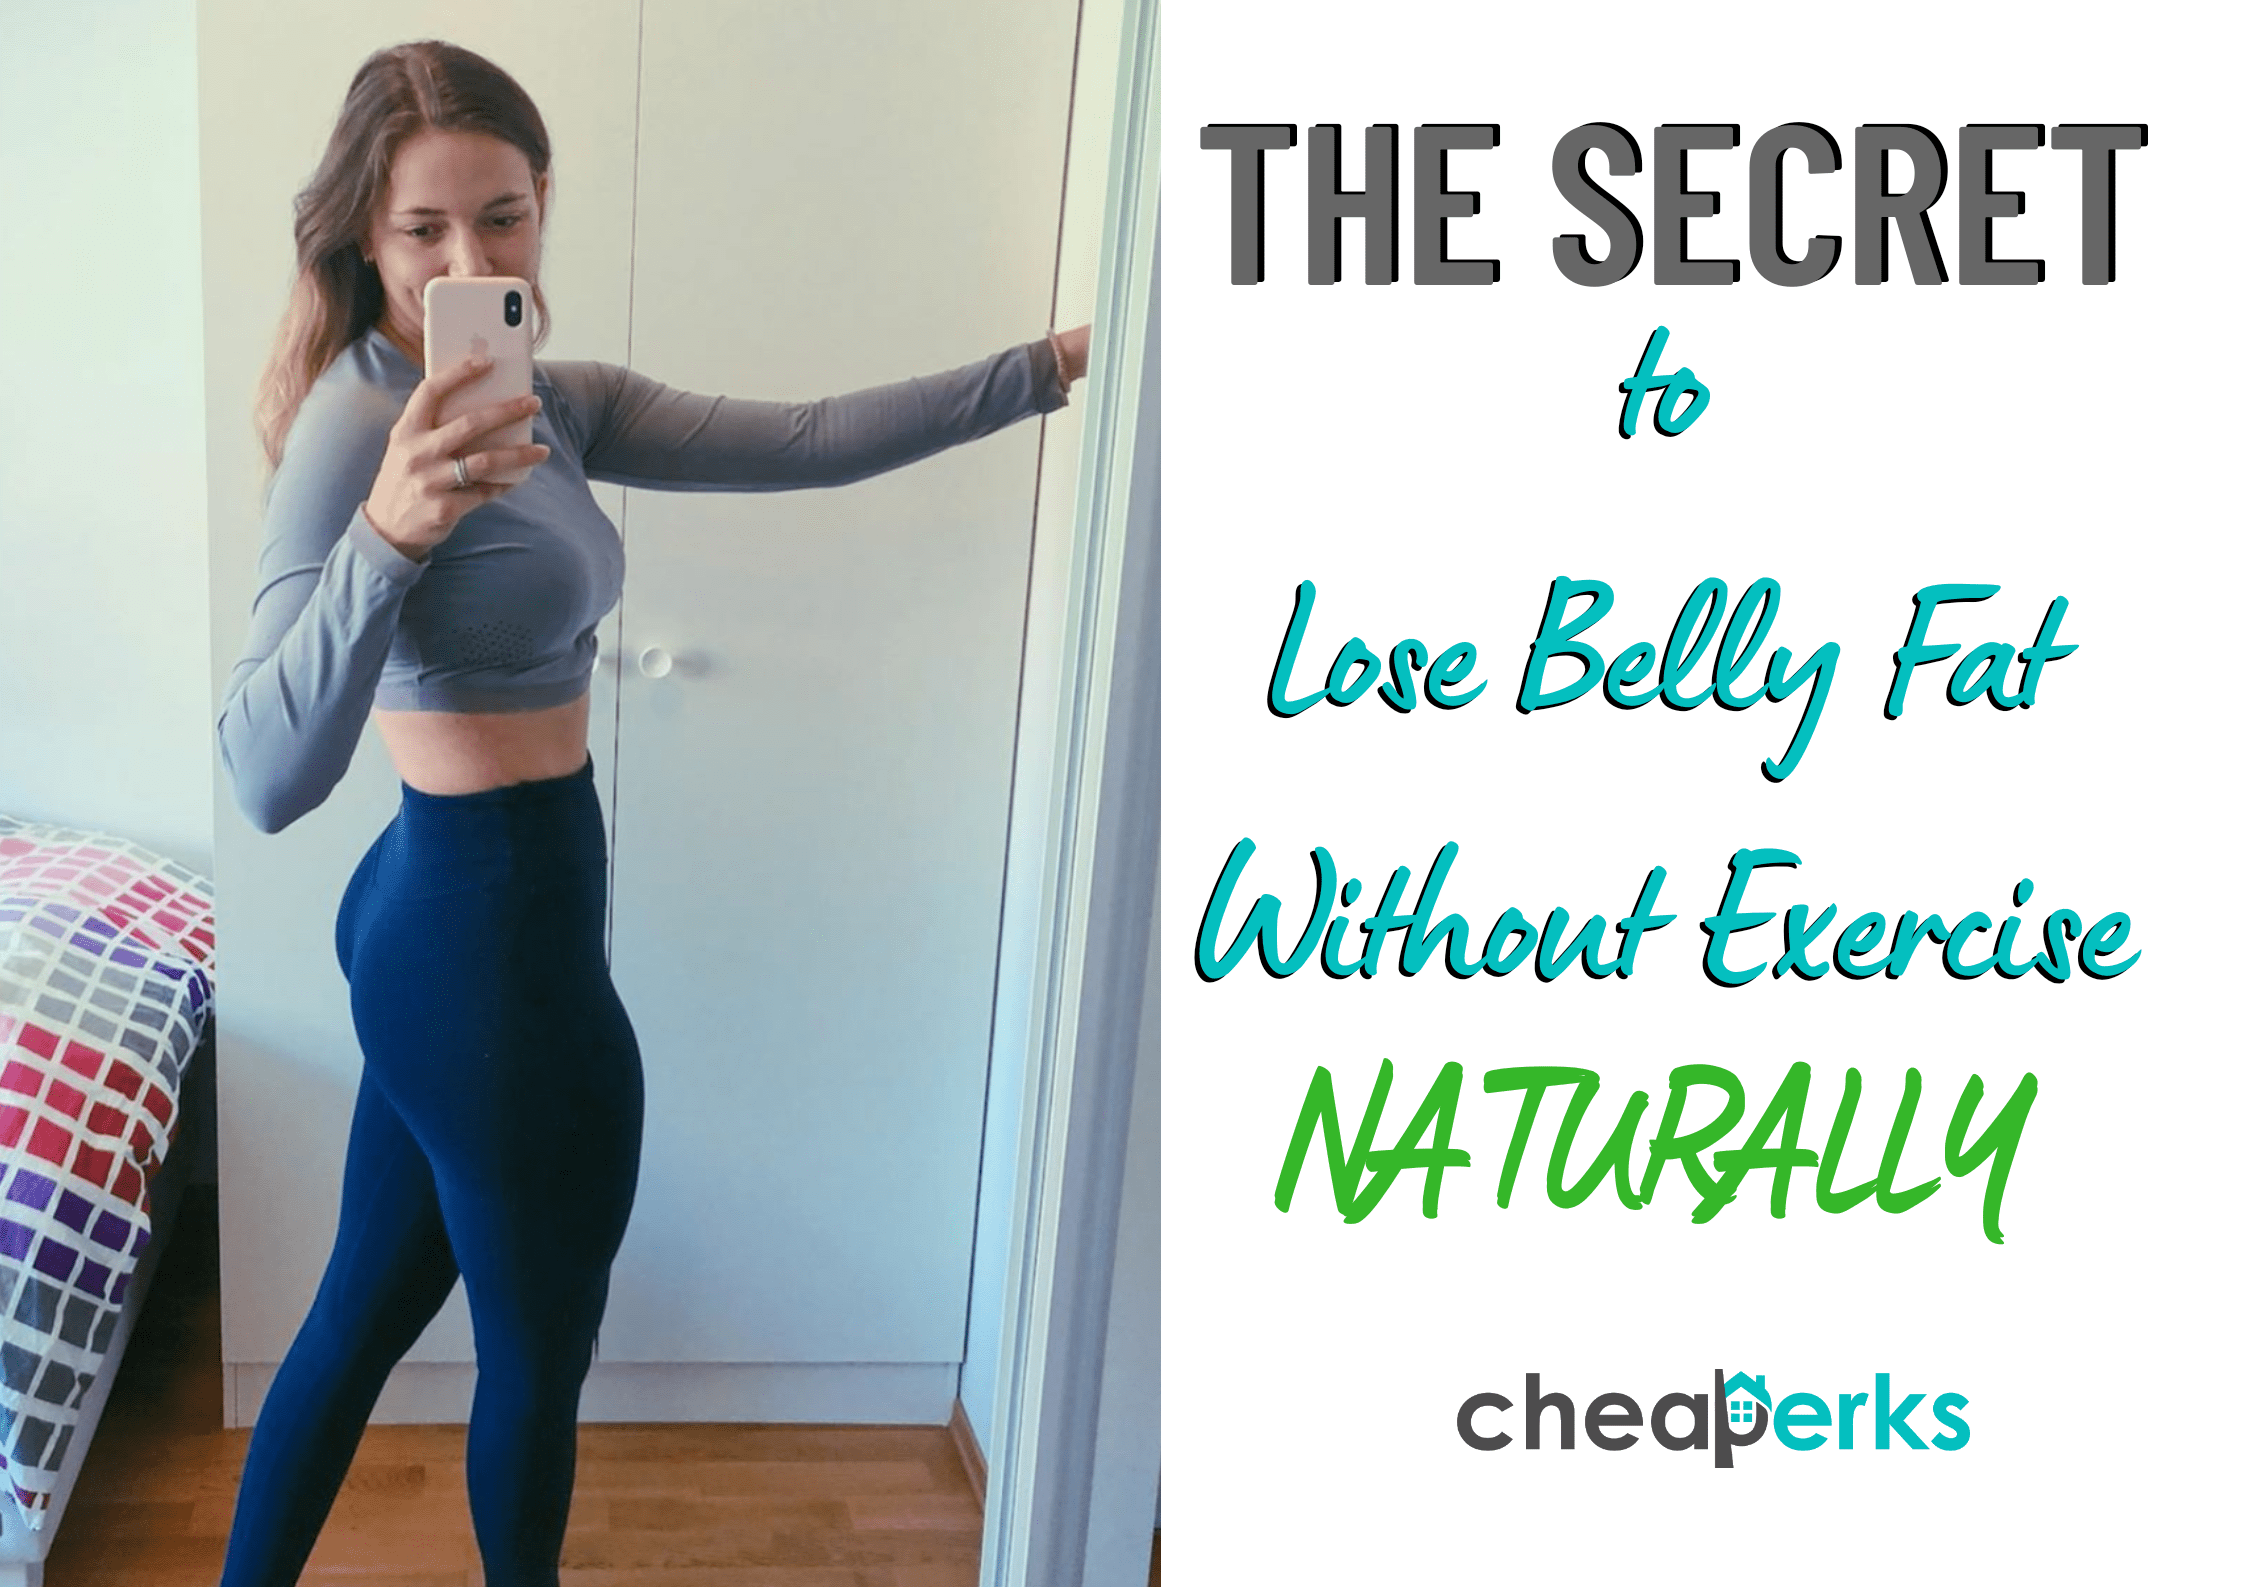 Lose Belly Fat Without Exercise NATURALLY E1590095722521 